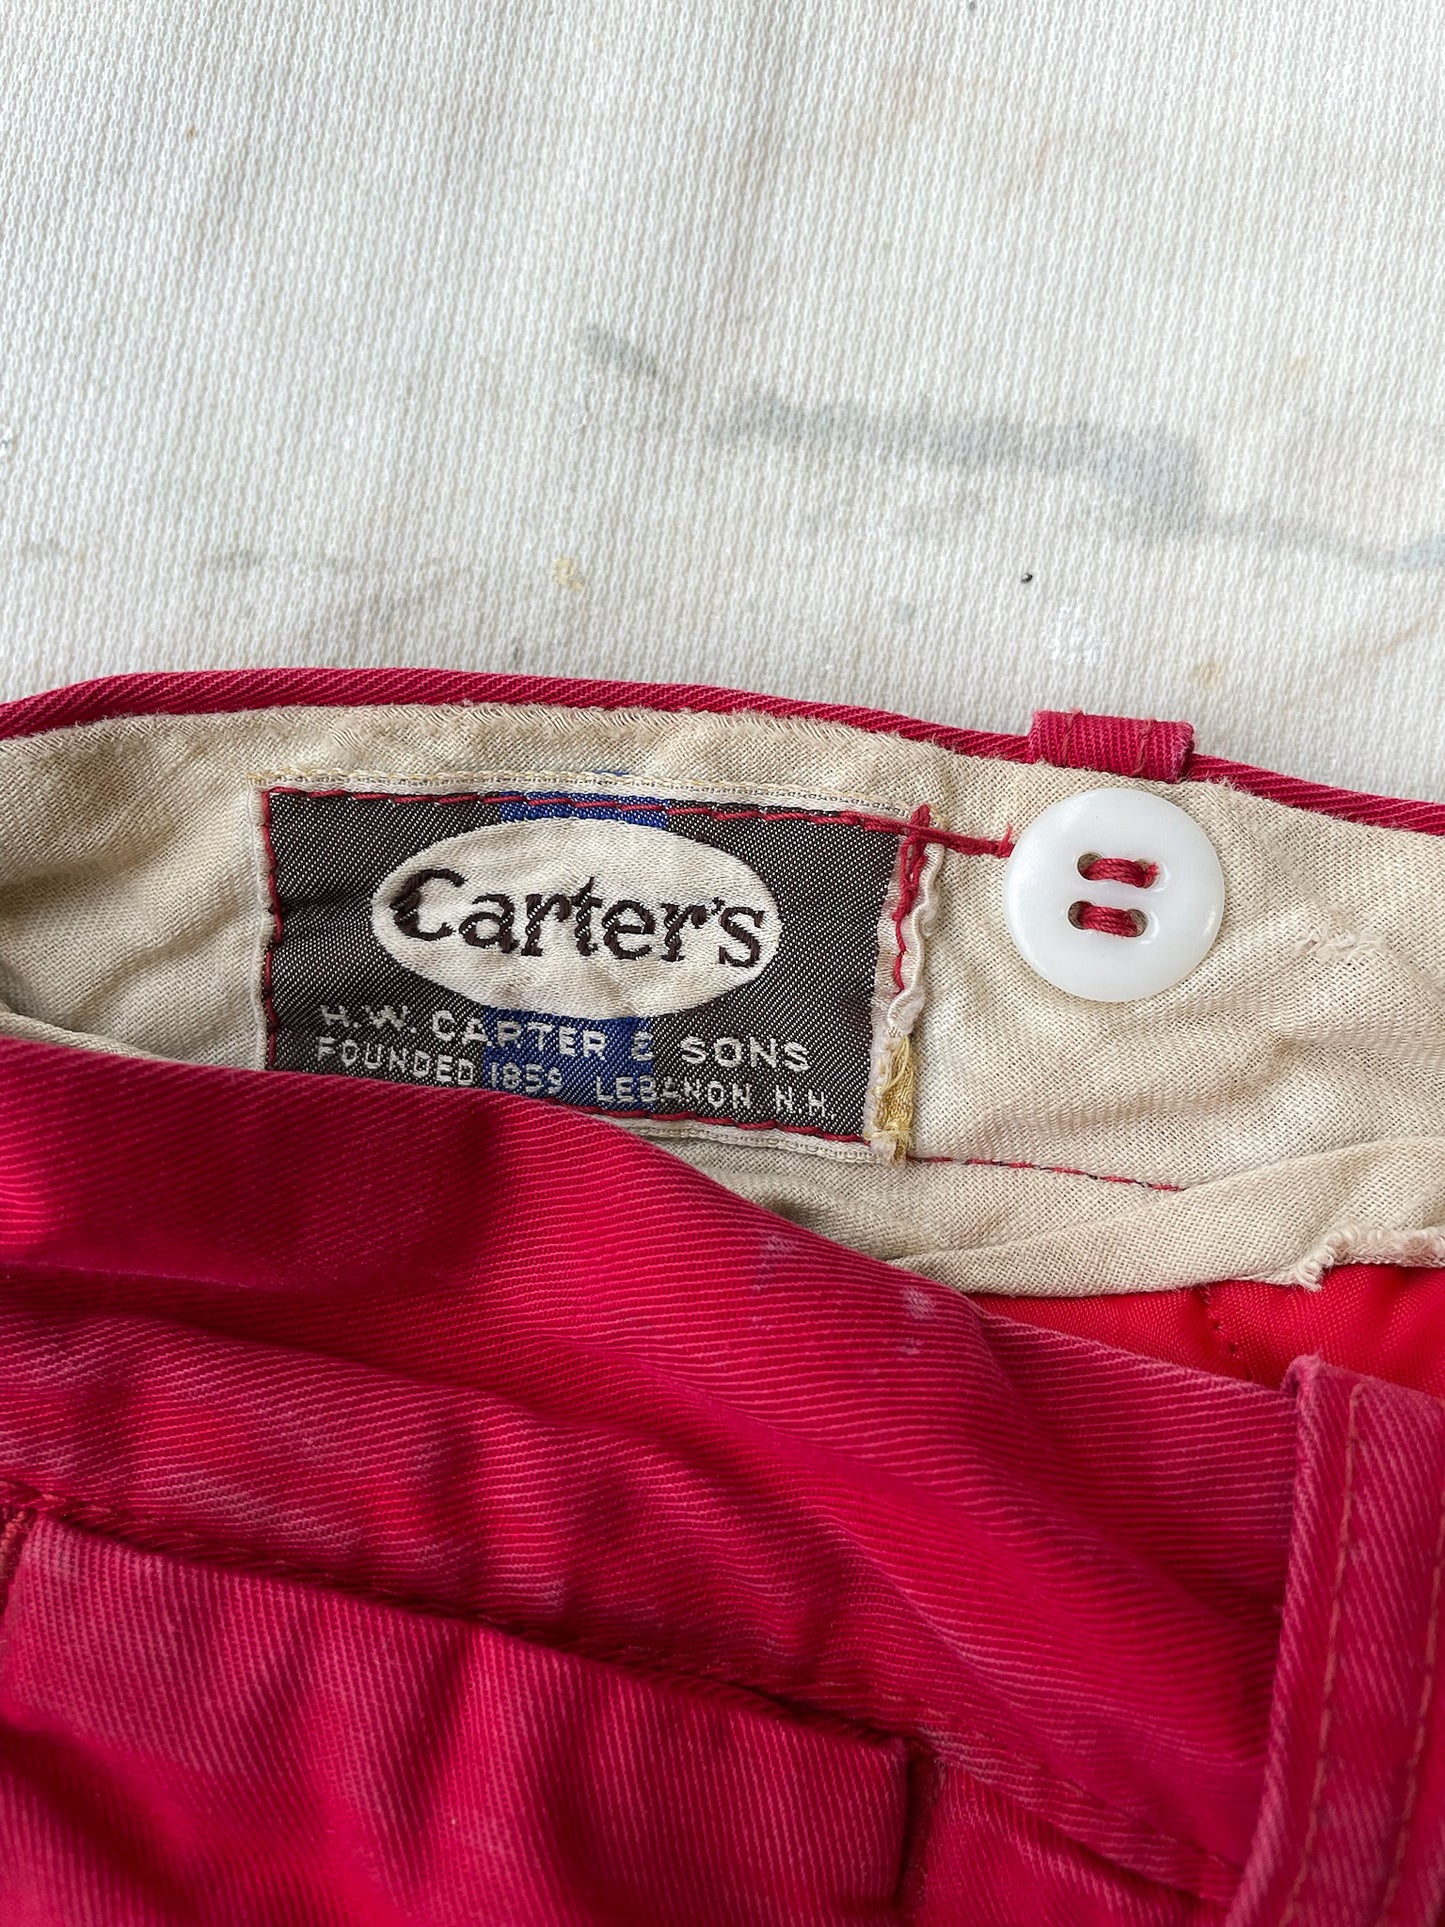 Carter's Insulated Hunting Pants—[34x30]